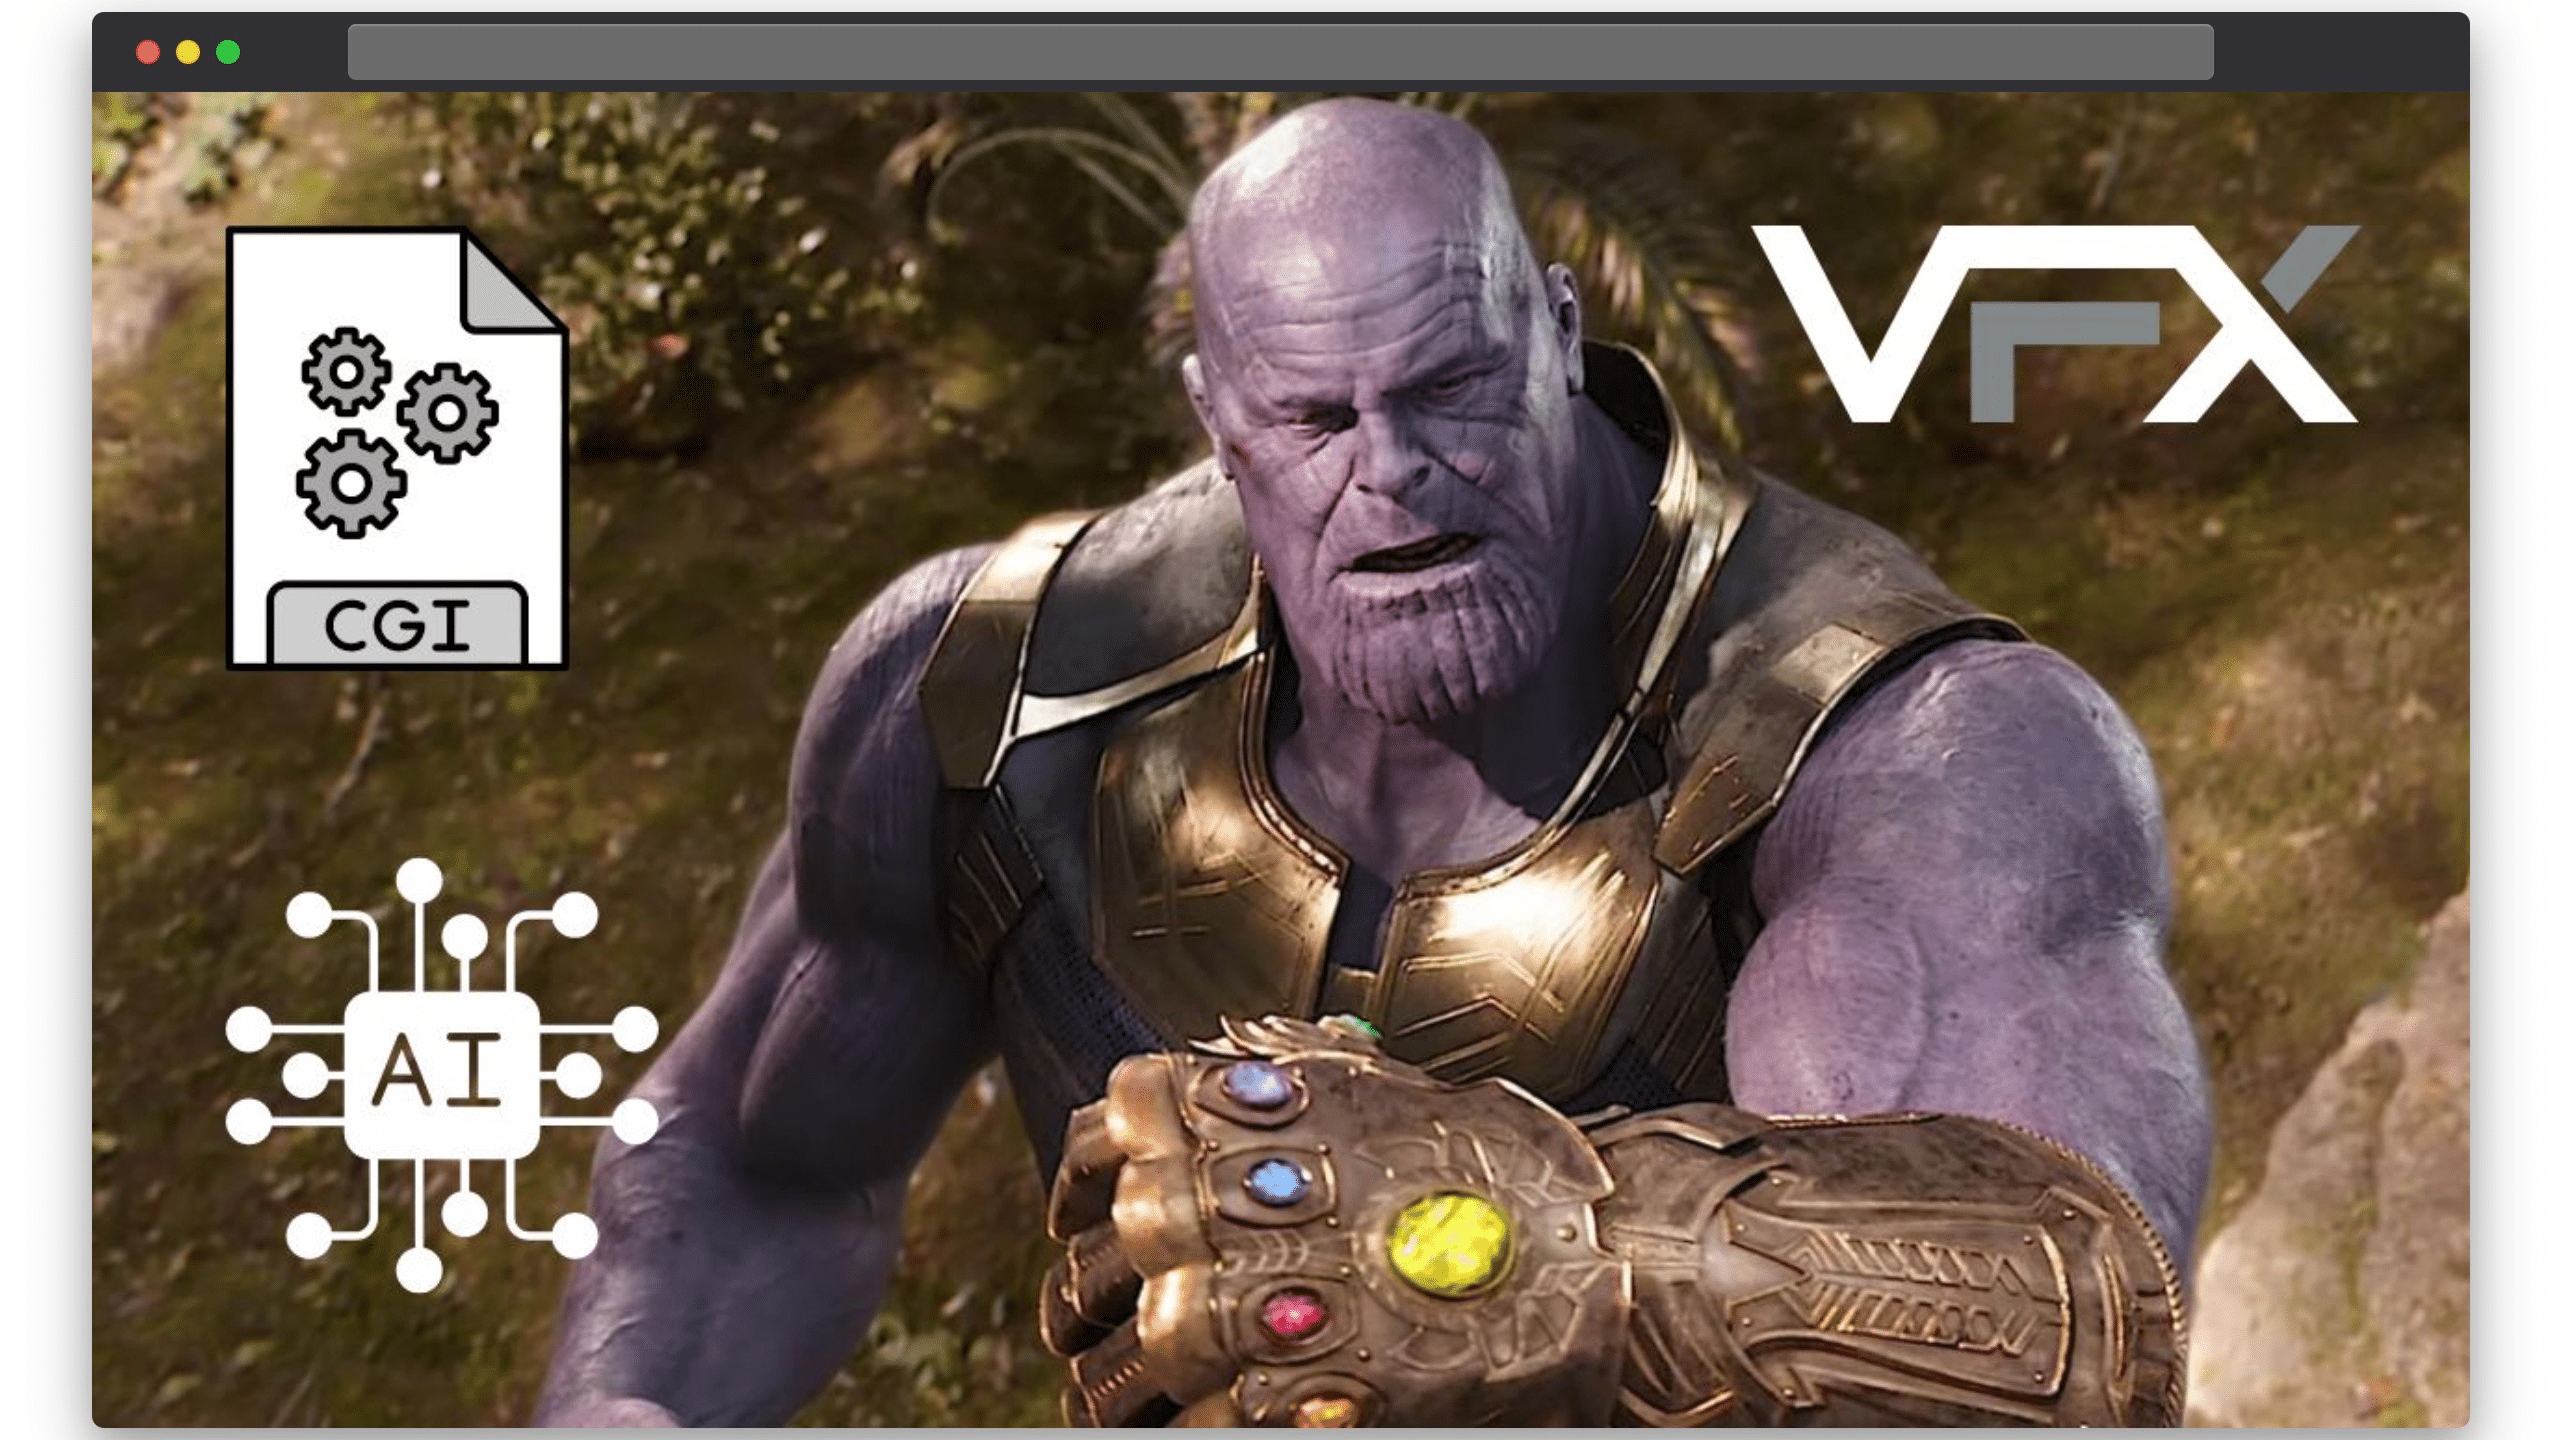 Thanos, from the Marvel Cinematic Universe